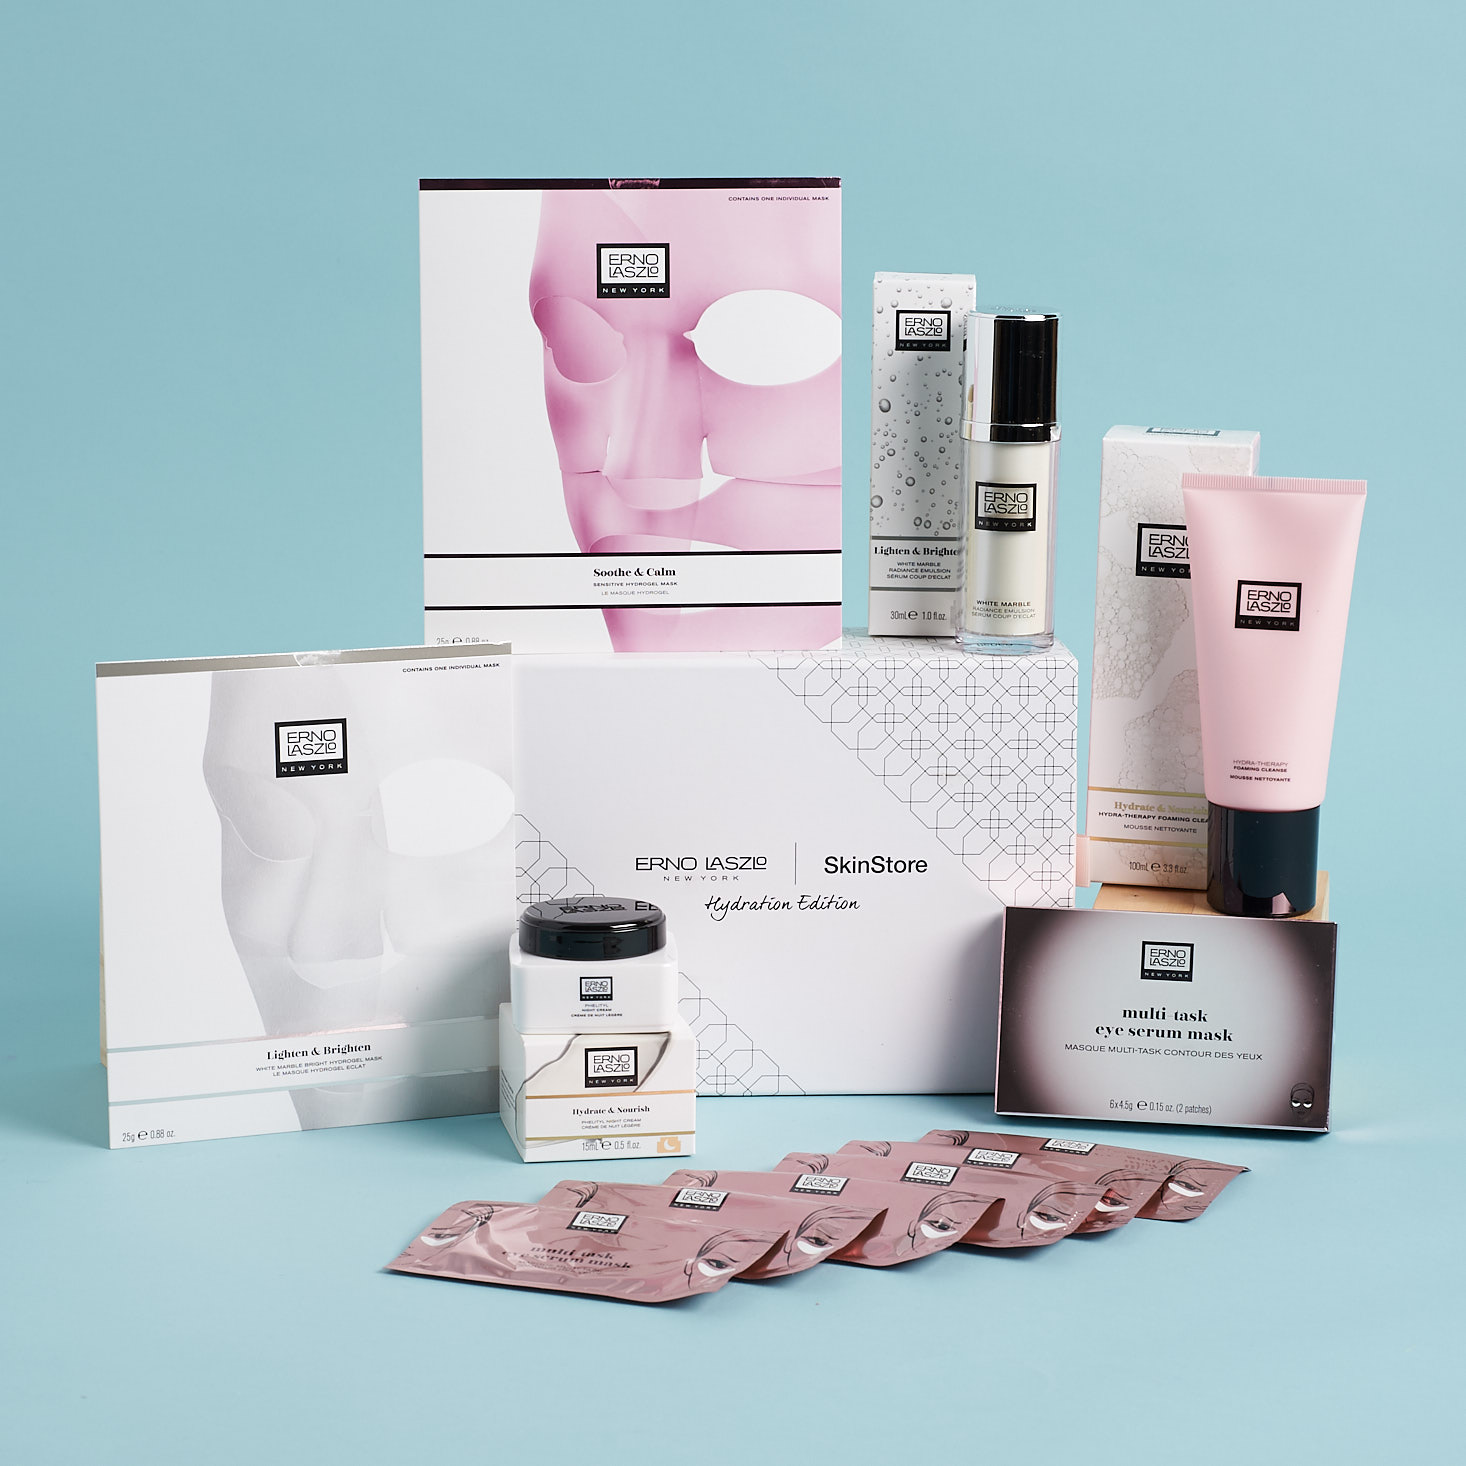 SkinStore x Erno Laszlo Limited Edition Beauty Box Review